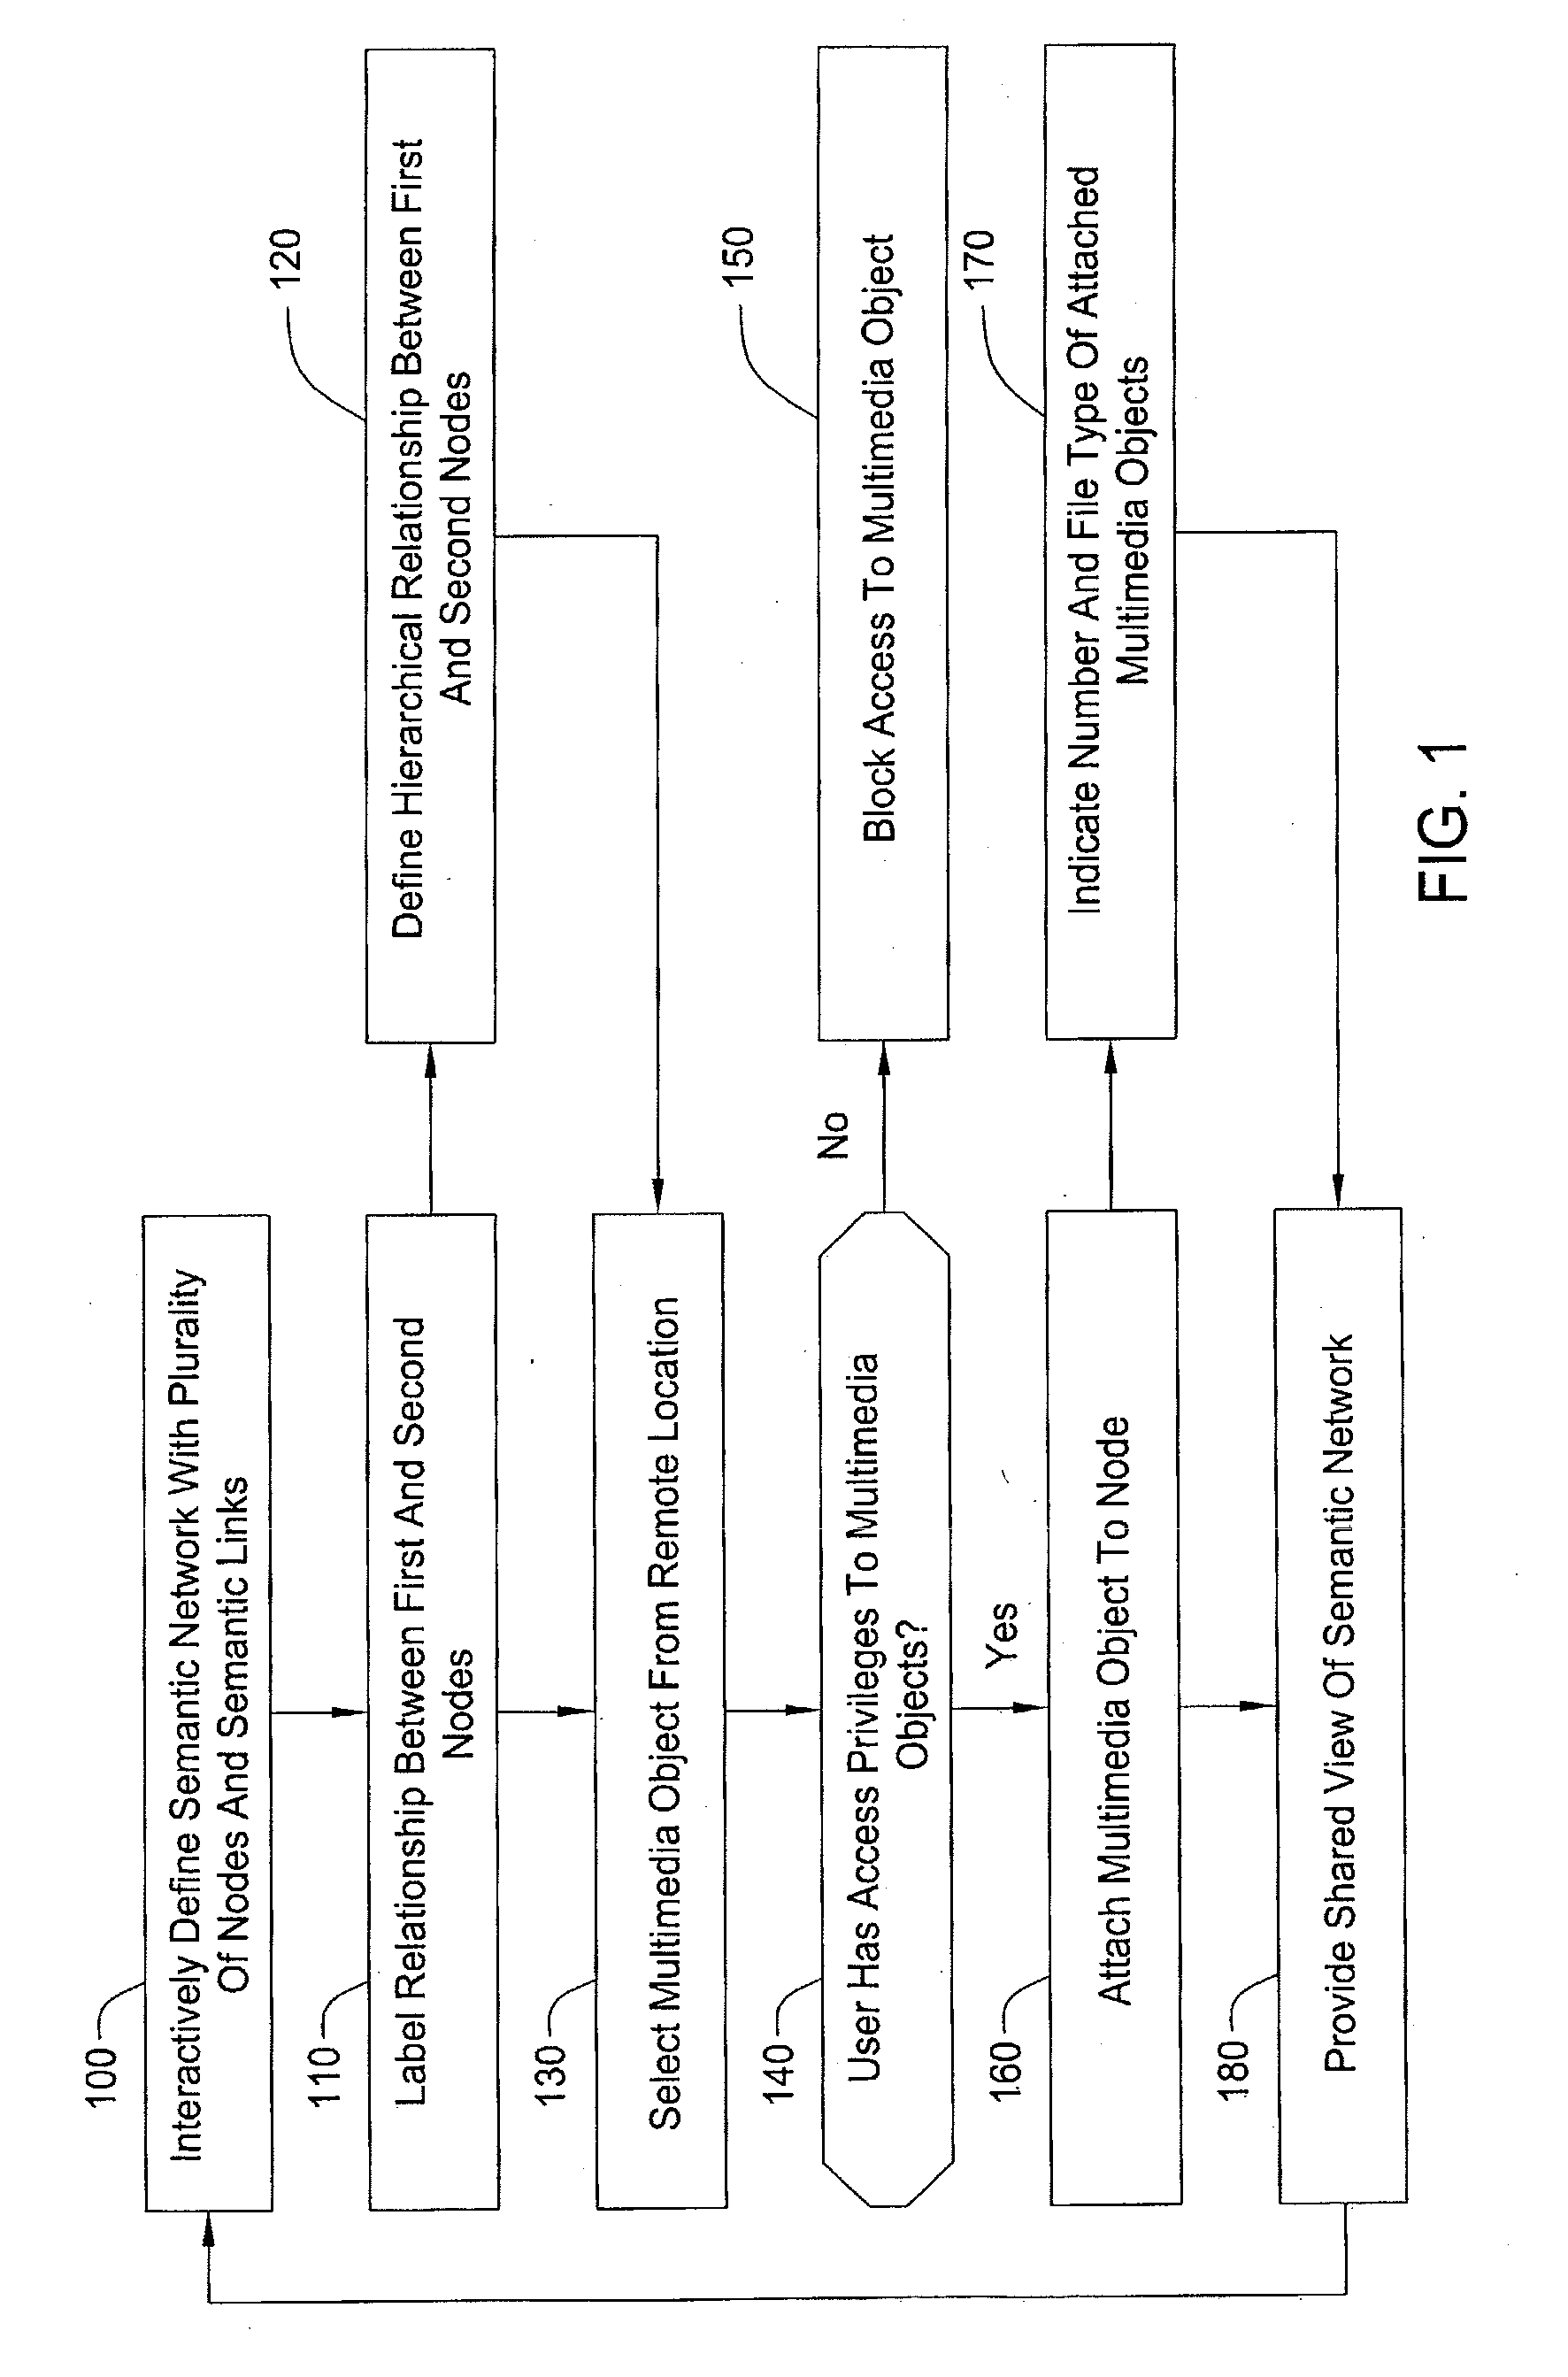 Methods and apparatus for storing, organizing, and sharing multimedia objects and documents